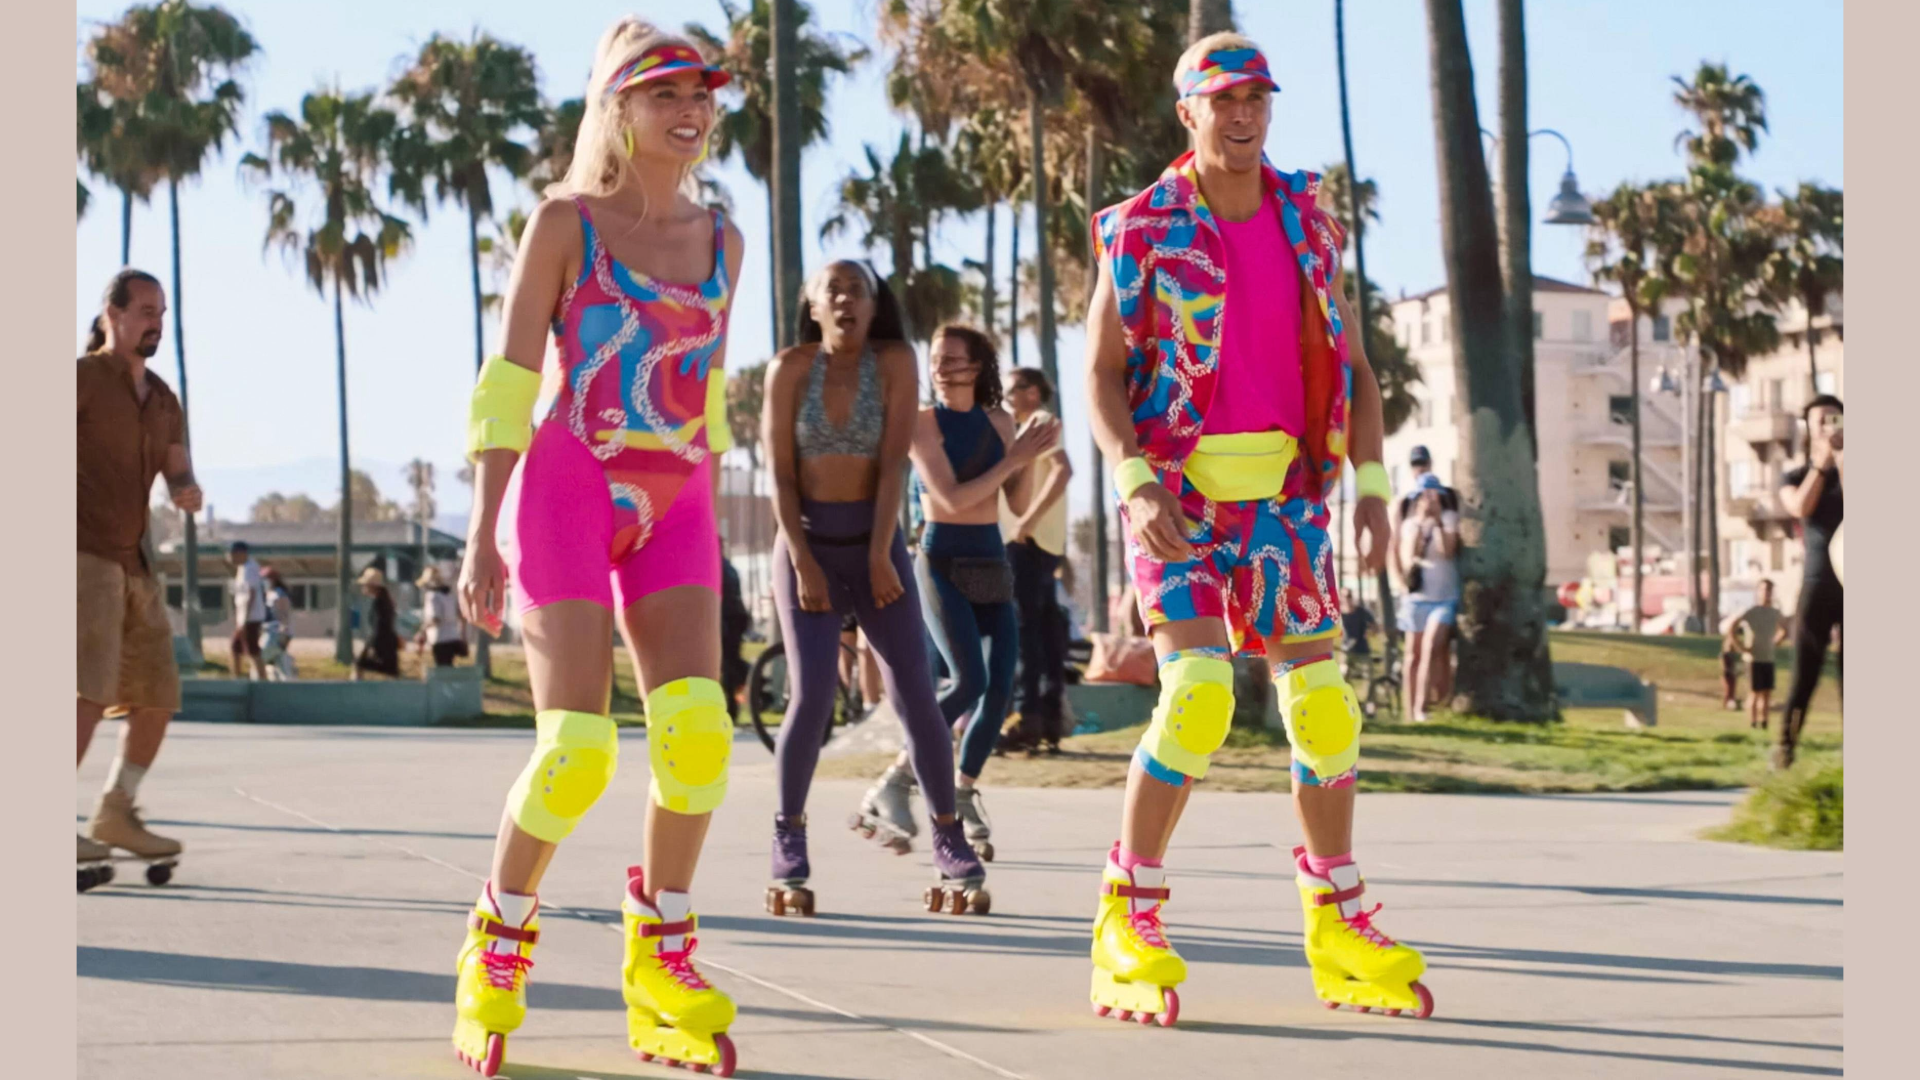 Margot Robbie and Ryan Gosling as Barbie and Ken from the film Barbie both dressing in bright colourful rollerblading outfits skating down a path in LA with palm trees and people behind them